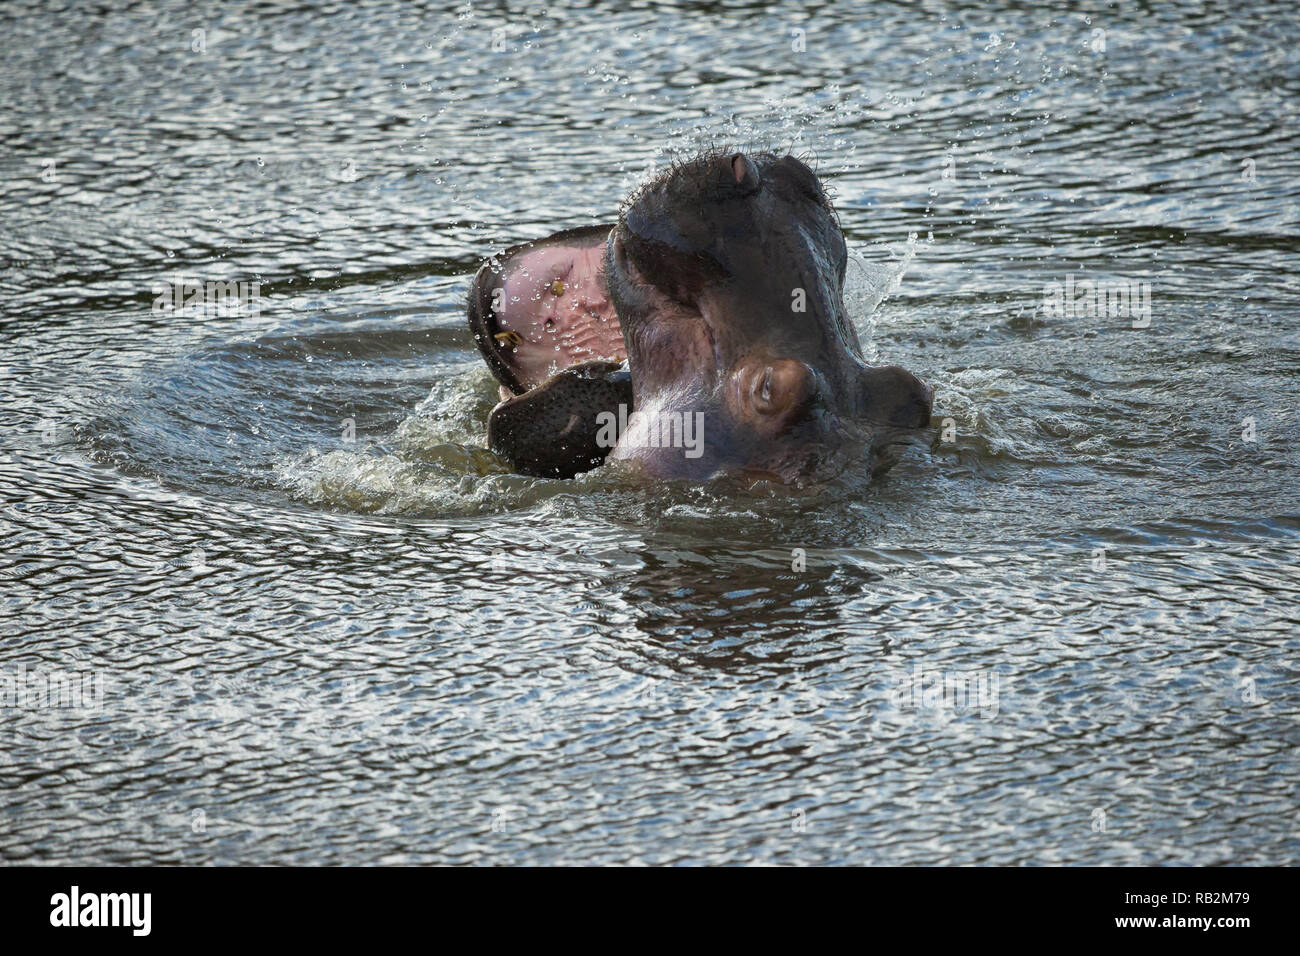 Hippo or Hippopotamus (Hippopotamus amphibius) at the water surface with their mouths open interacting in the wild of South Africa Stock Photo